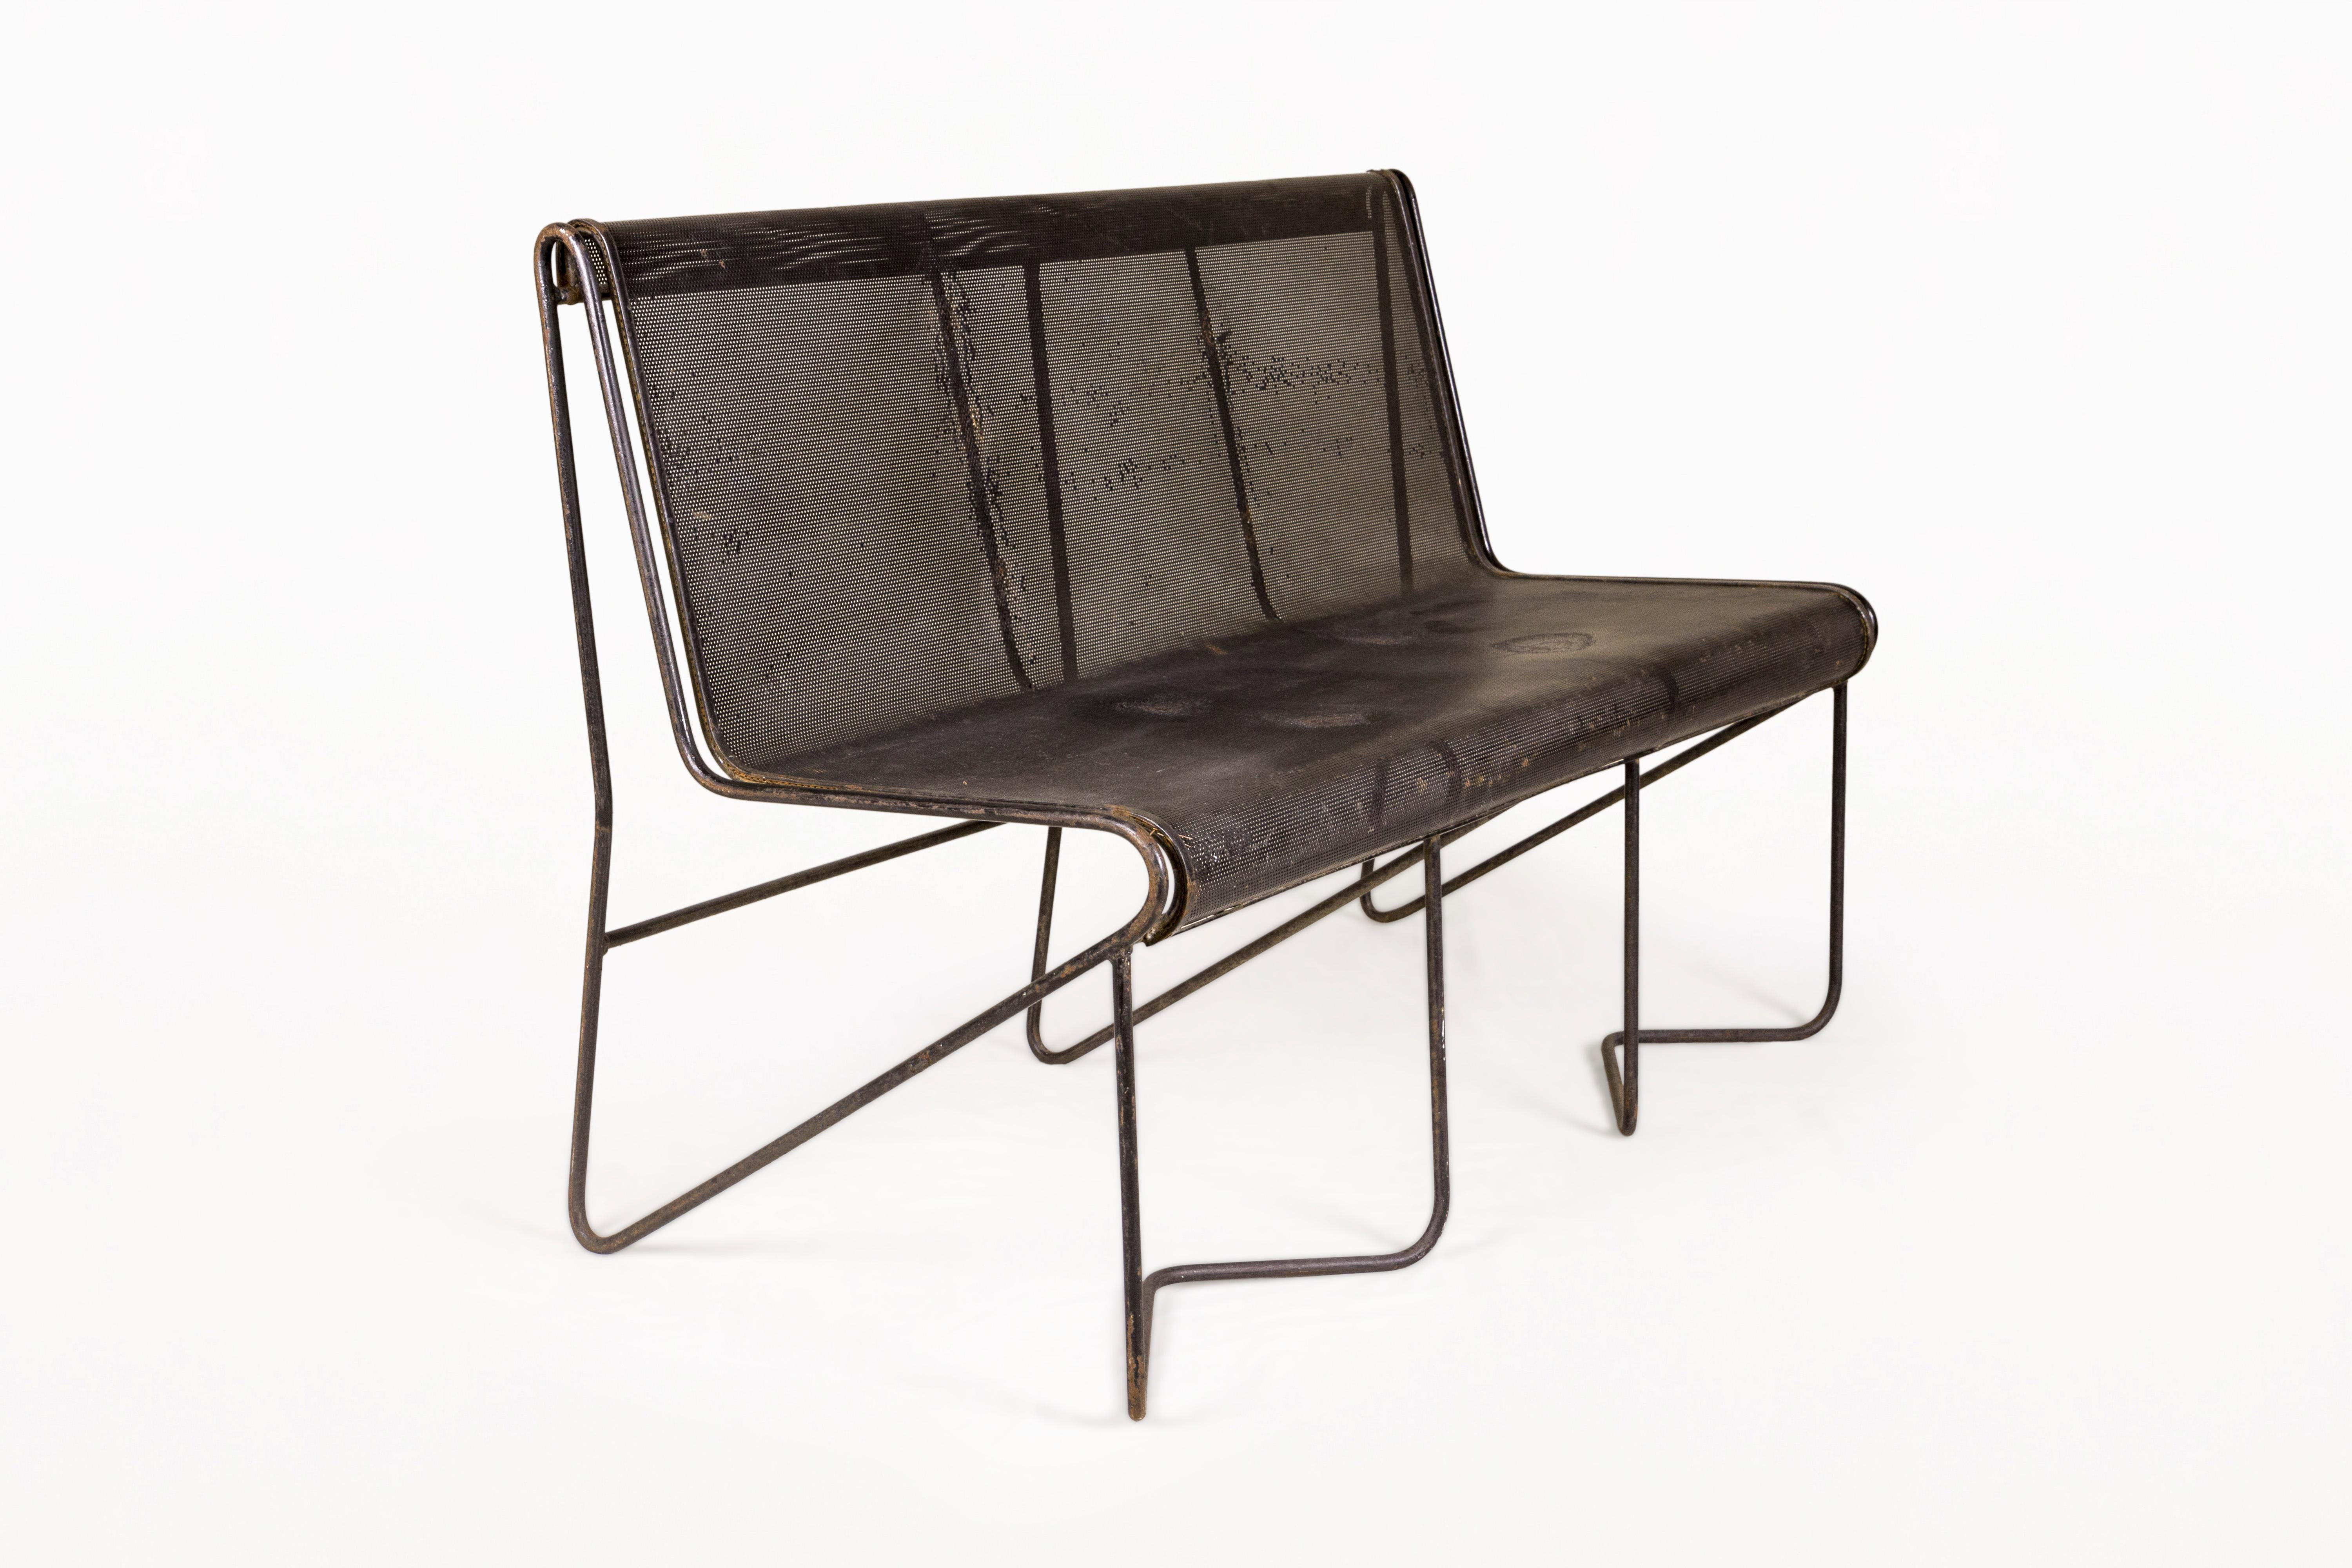 Mathieu Matégot bench.
Made with perforated iron.
Lacquered in black.
Circa 1950, France.
Very good vintage condition.
Mathieu Matégot (1910 - 2001) was a versatile, independent and self-taught Hungarian designer, architect and artist who spent most